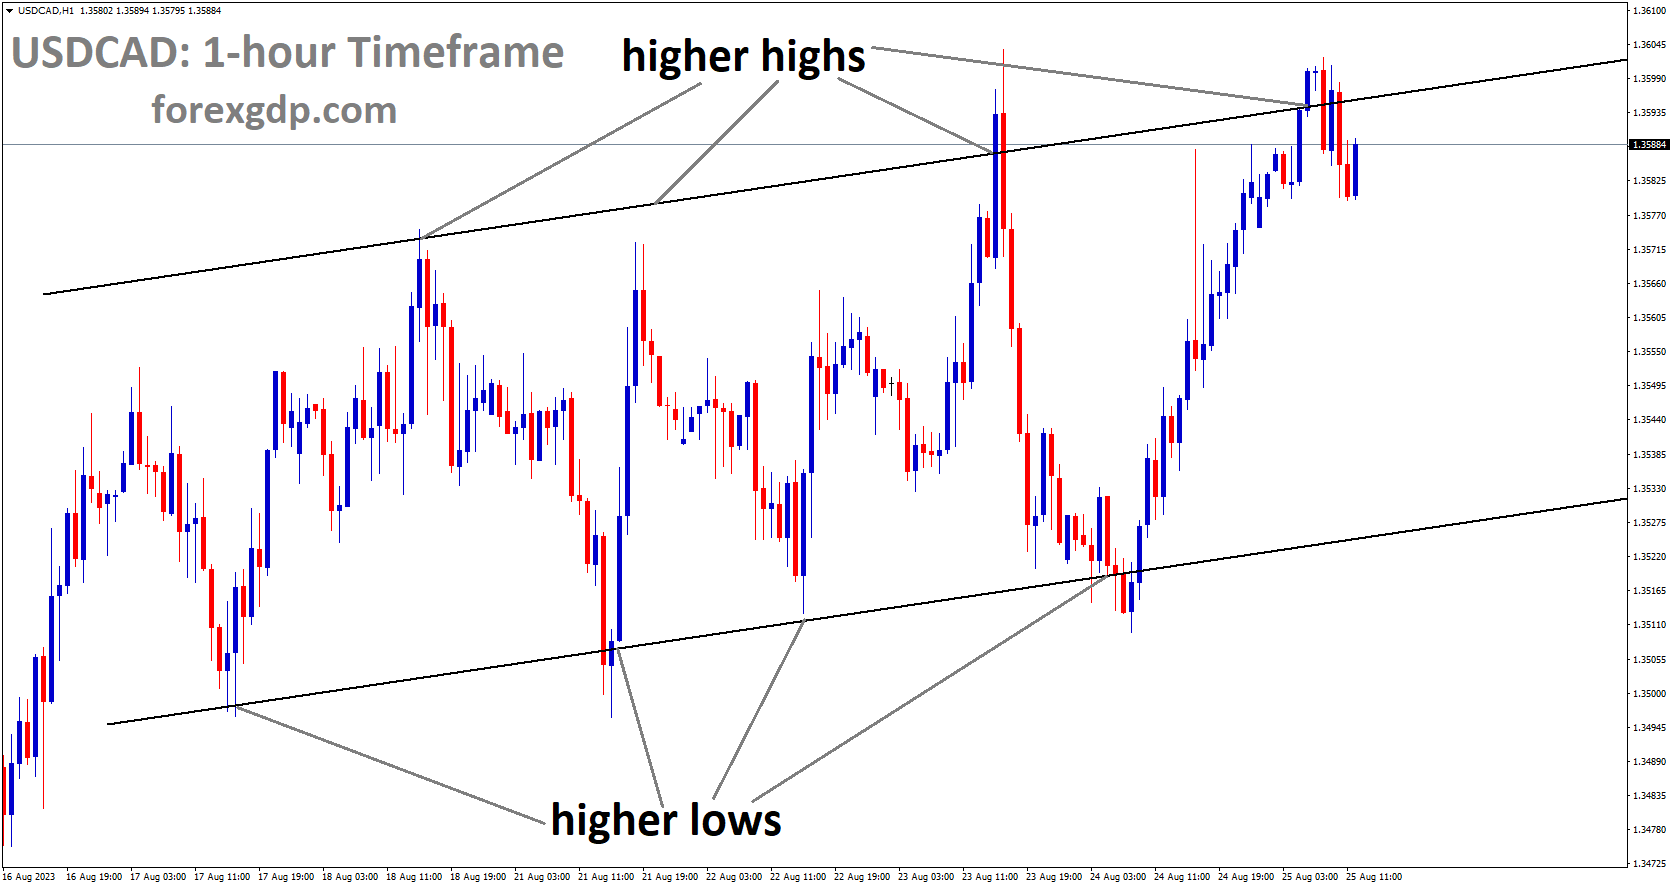 USDCAD is moving in Ascending channel and market has reached higher high area of the channel